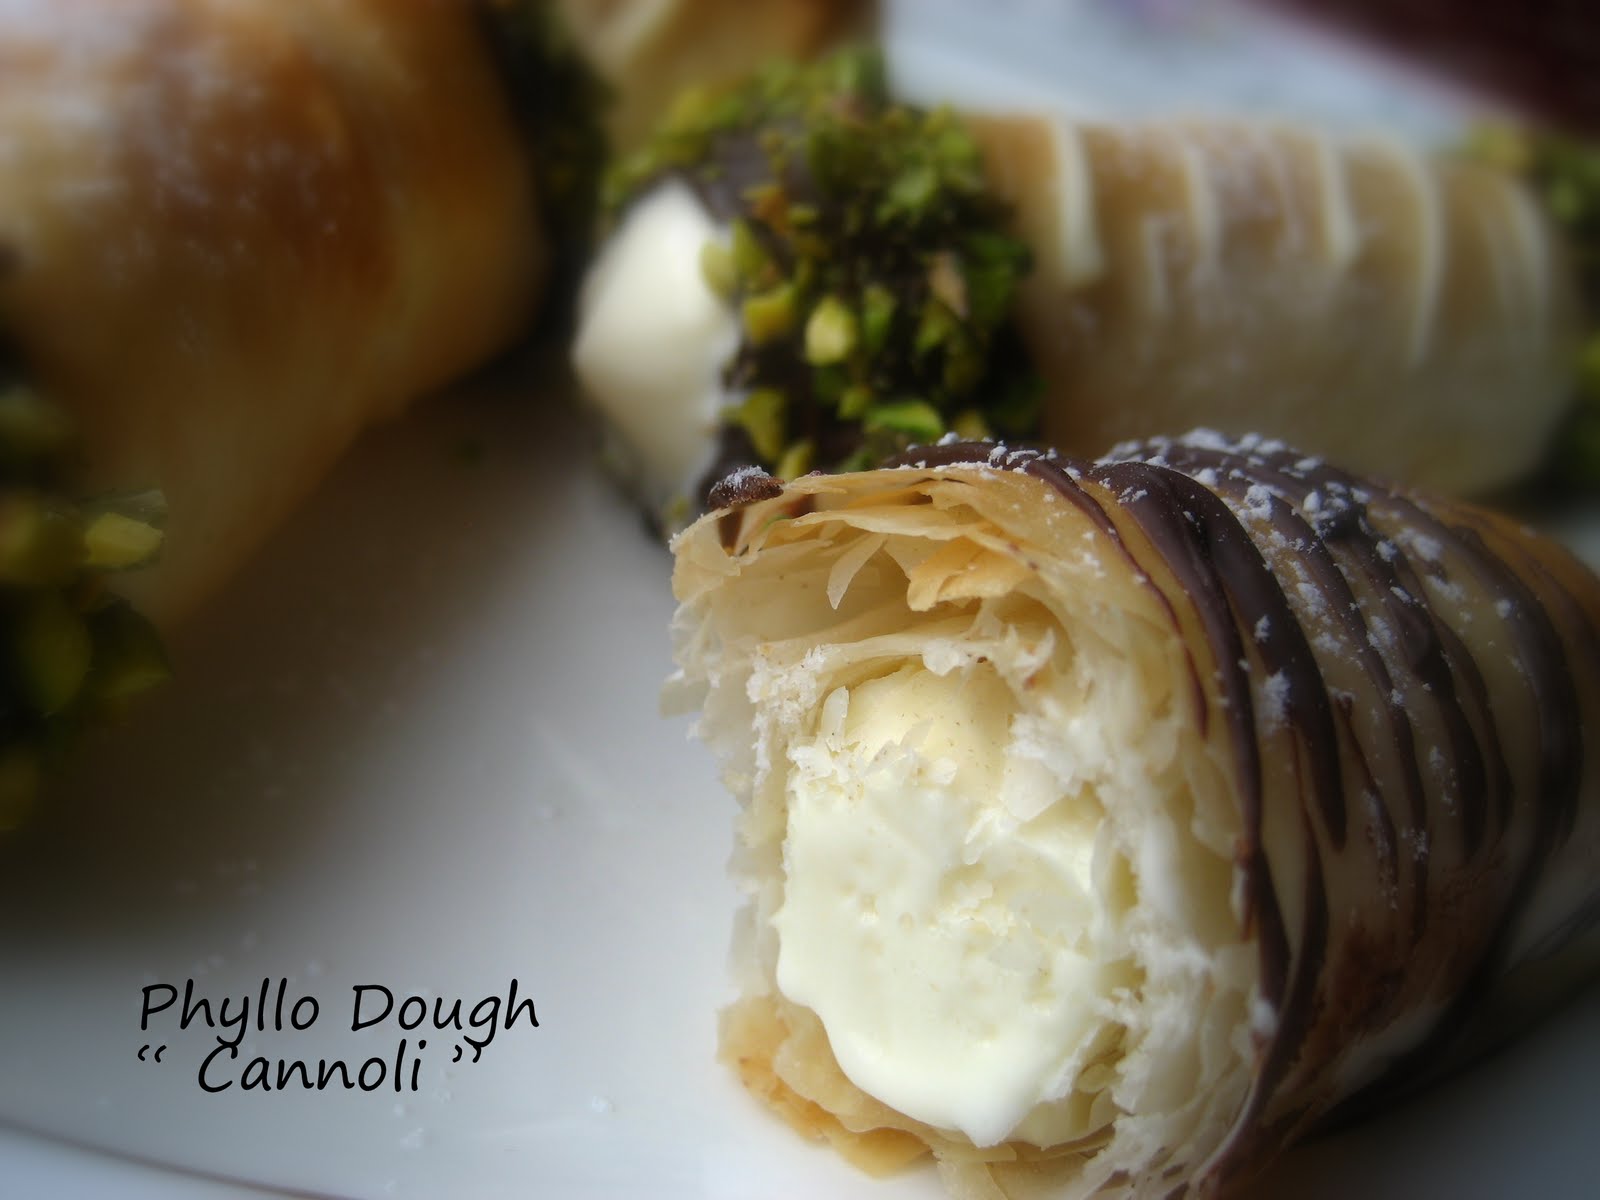 Home Cooking In Montana: Phyllo Dough " Cannoli "...filled with Vanilla Ice Cream